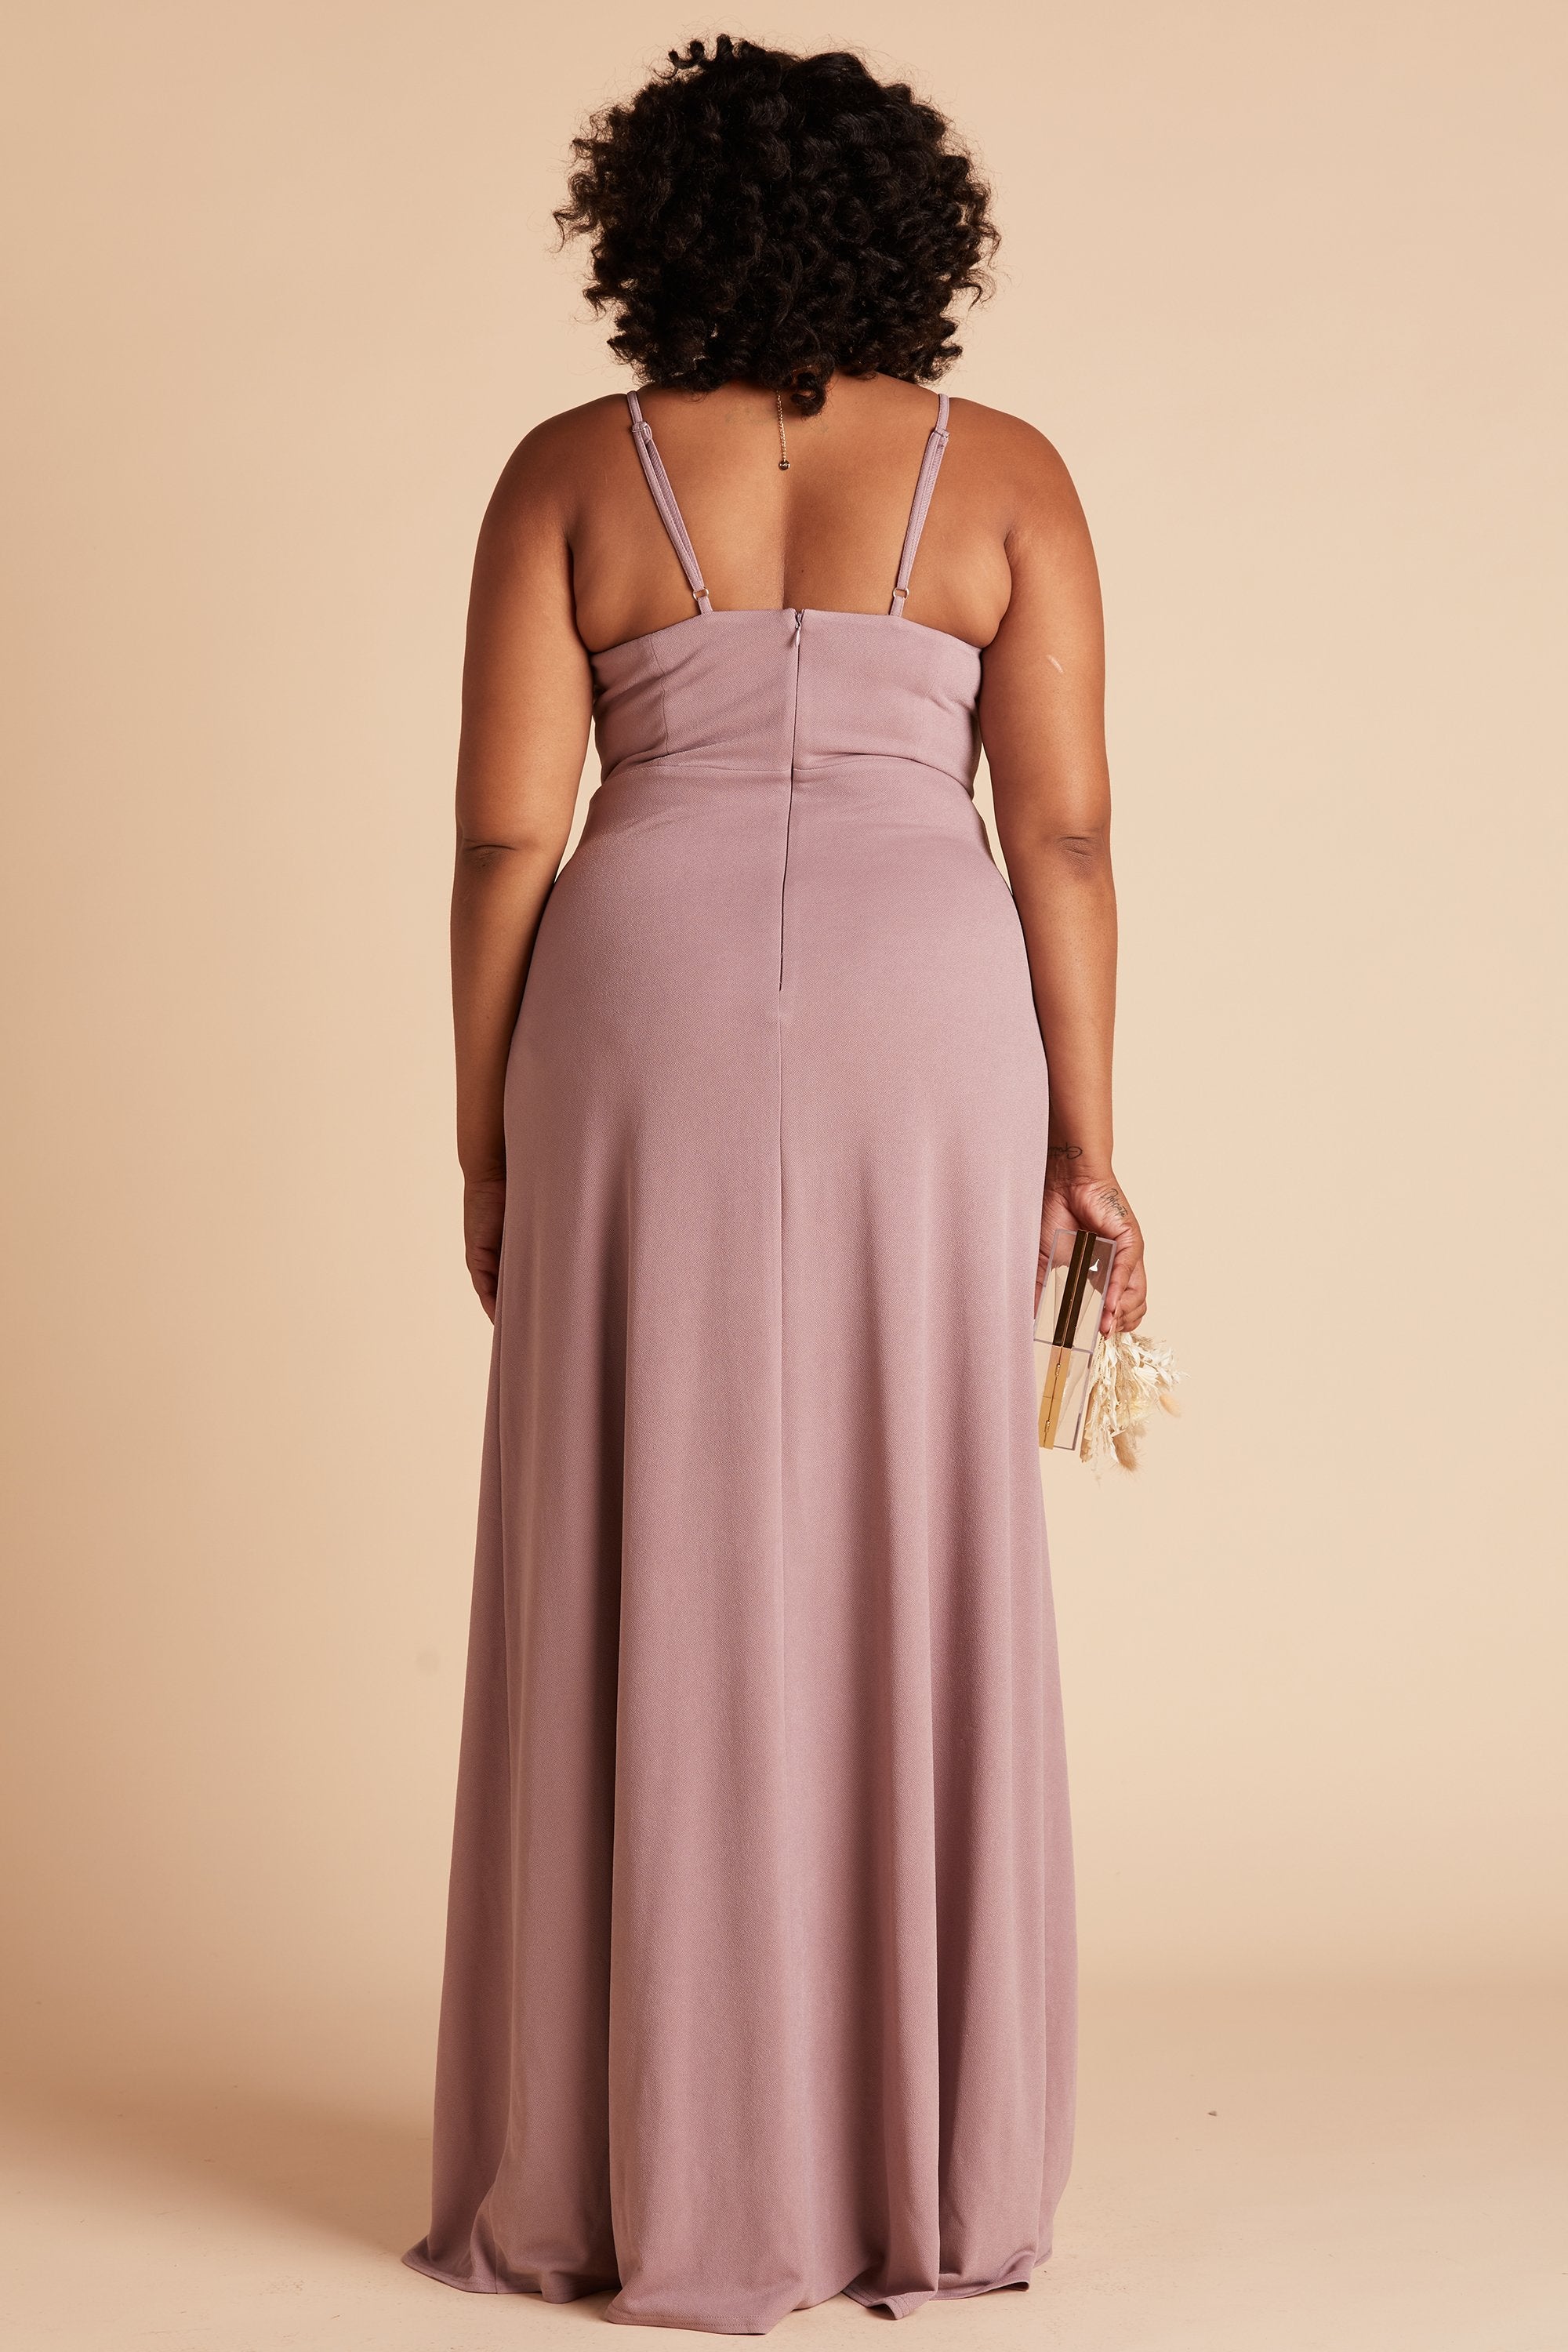 Ash plus size bridesmaid dress in dark mauve crepe by Birdy Grey, back view